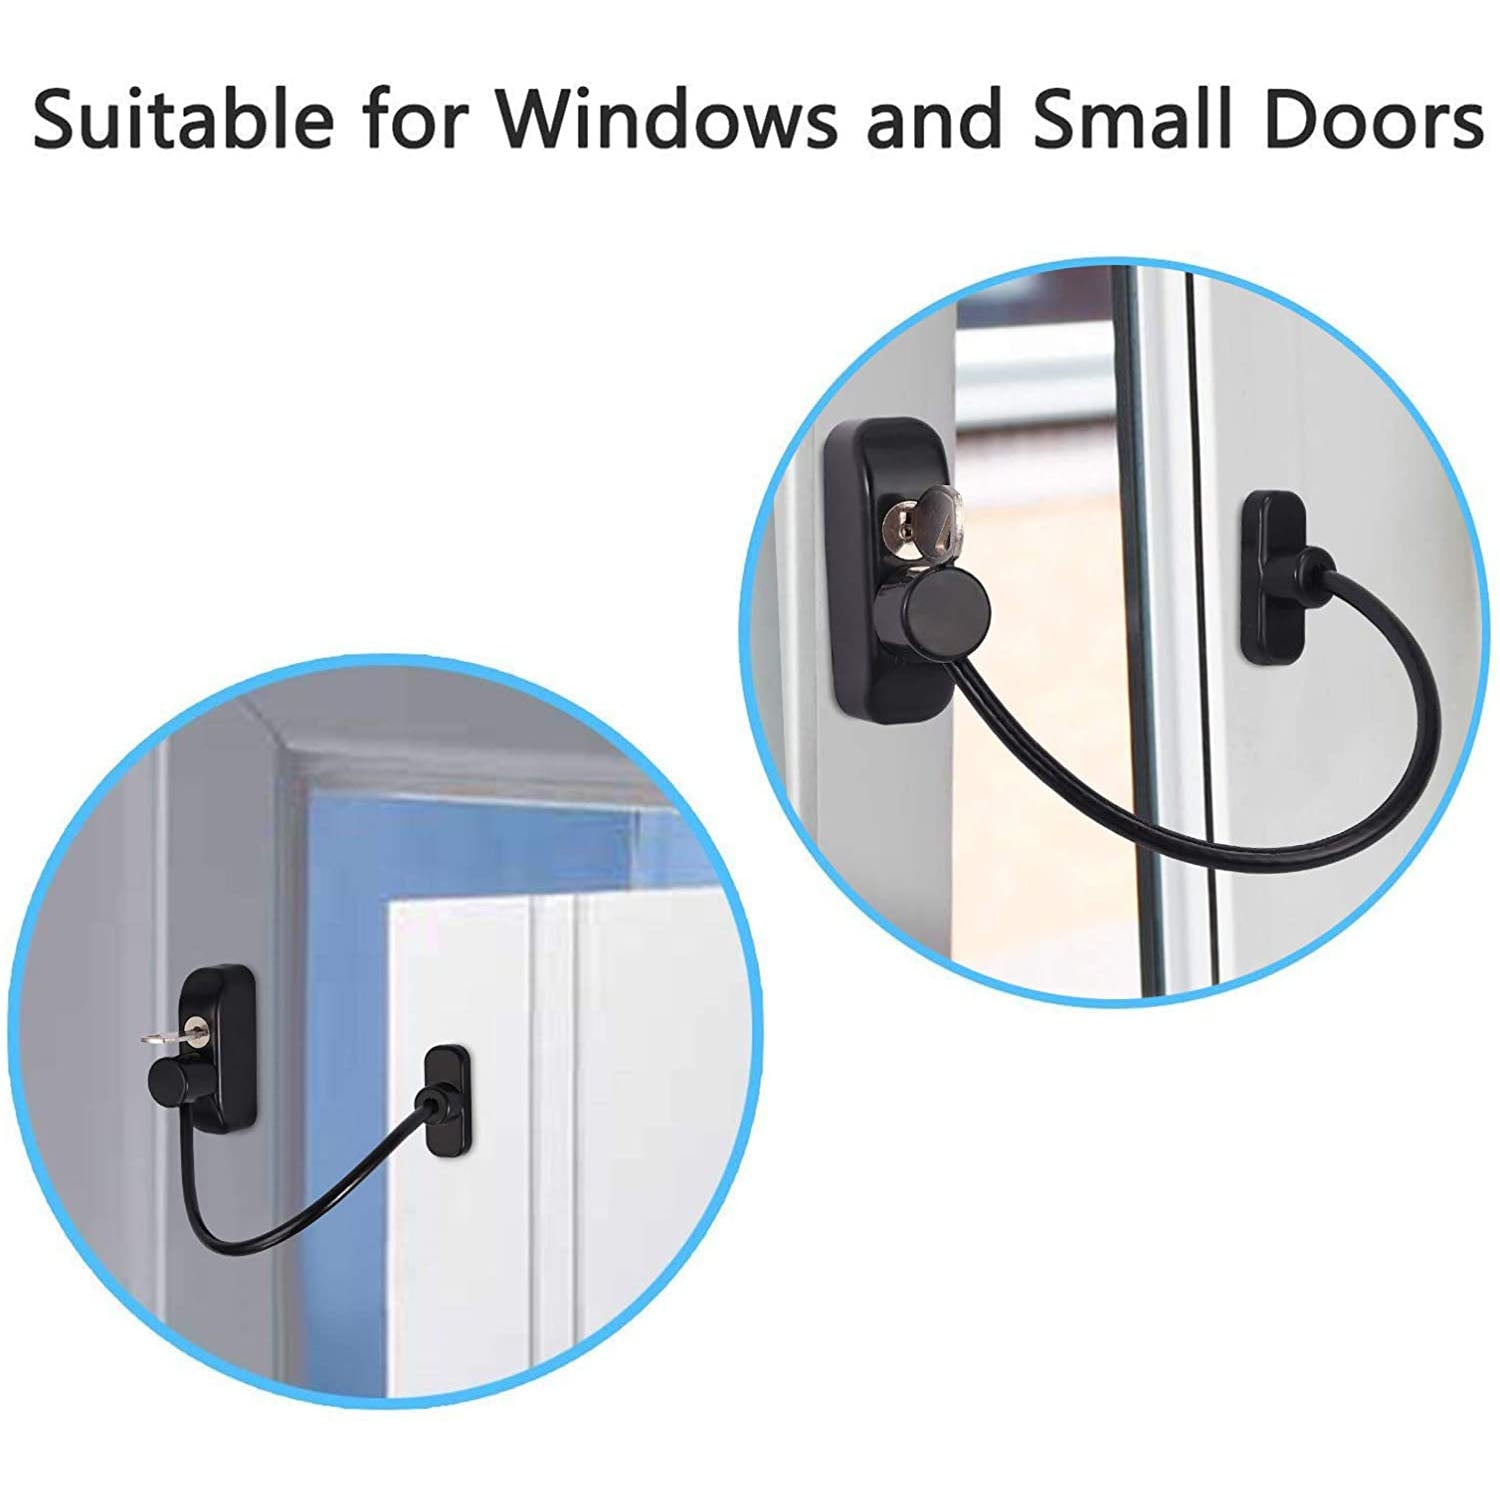 Proster Window Restrictor Locks 4 PCS Security Cable Black